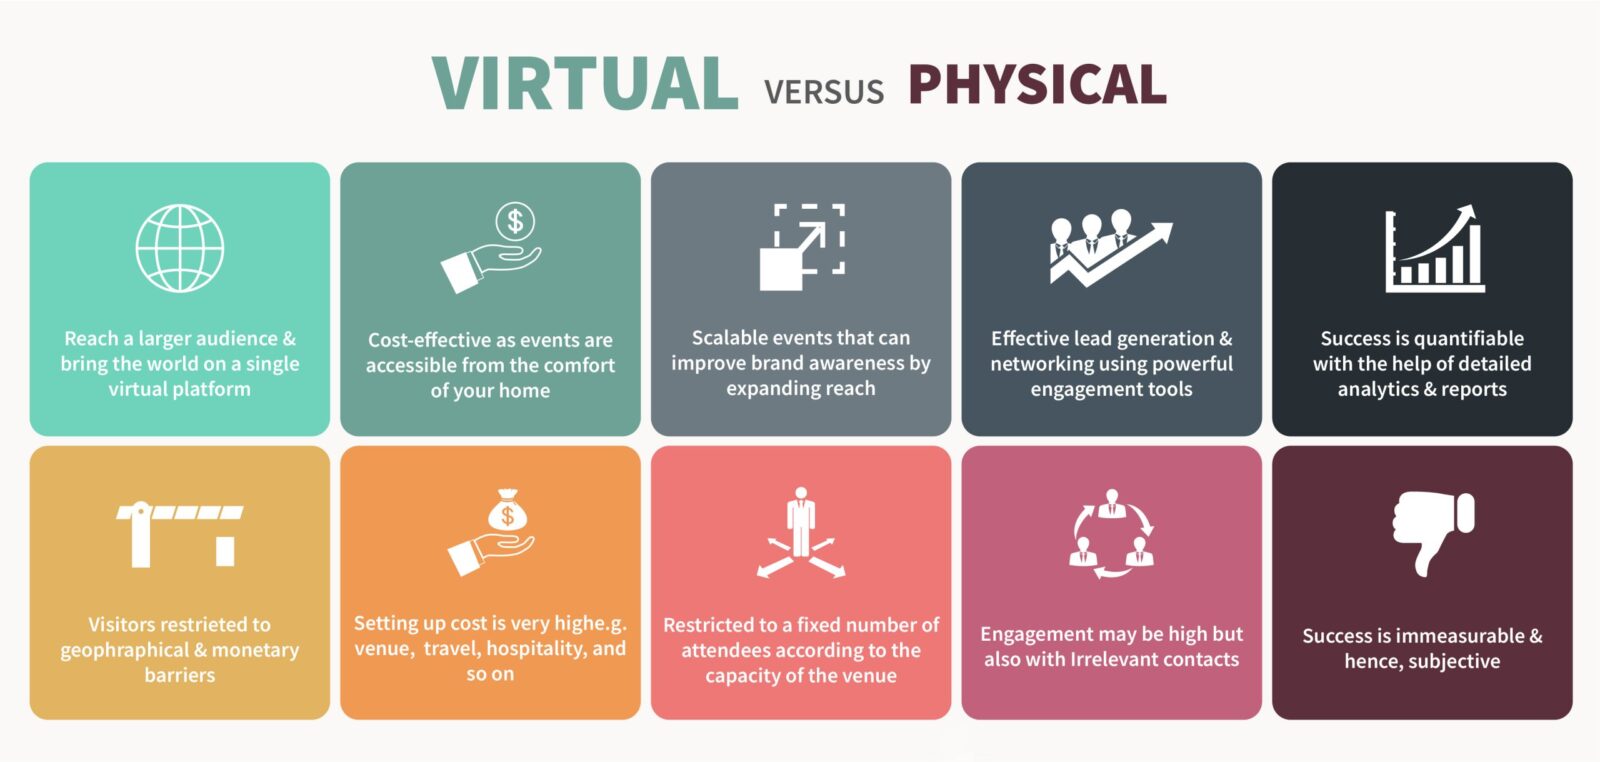 Importance and value of virtual events